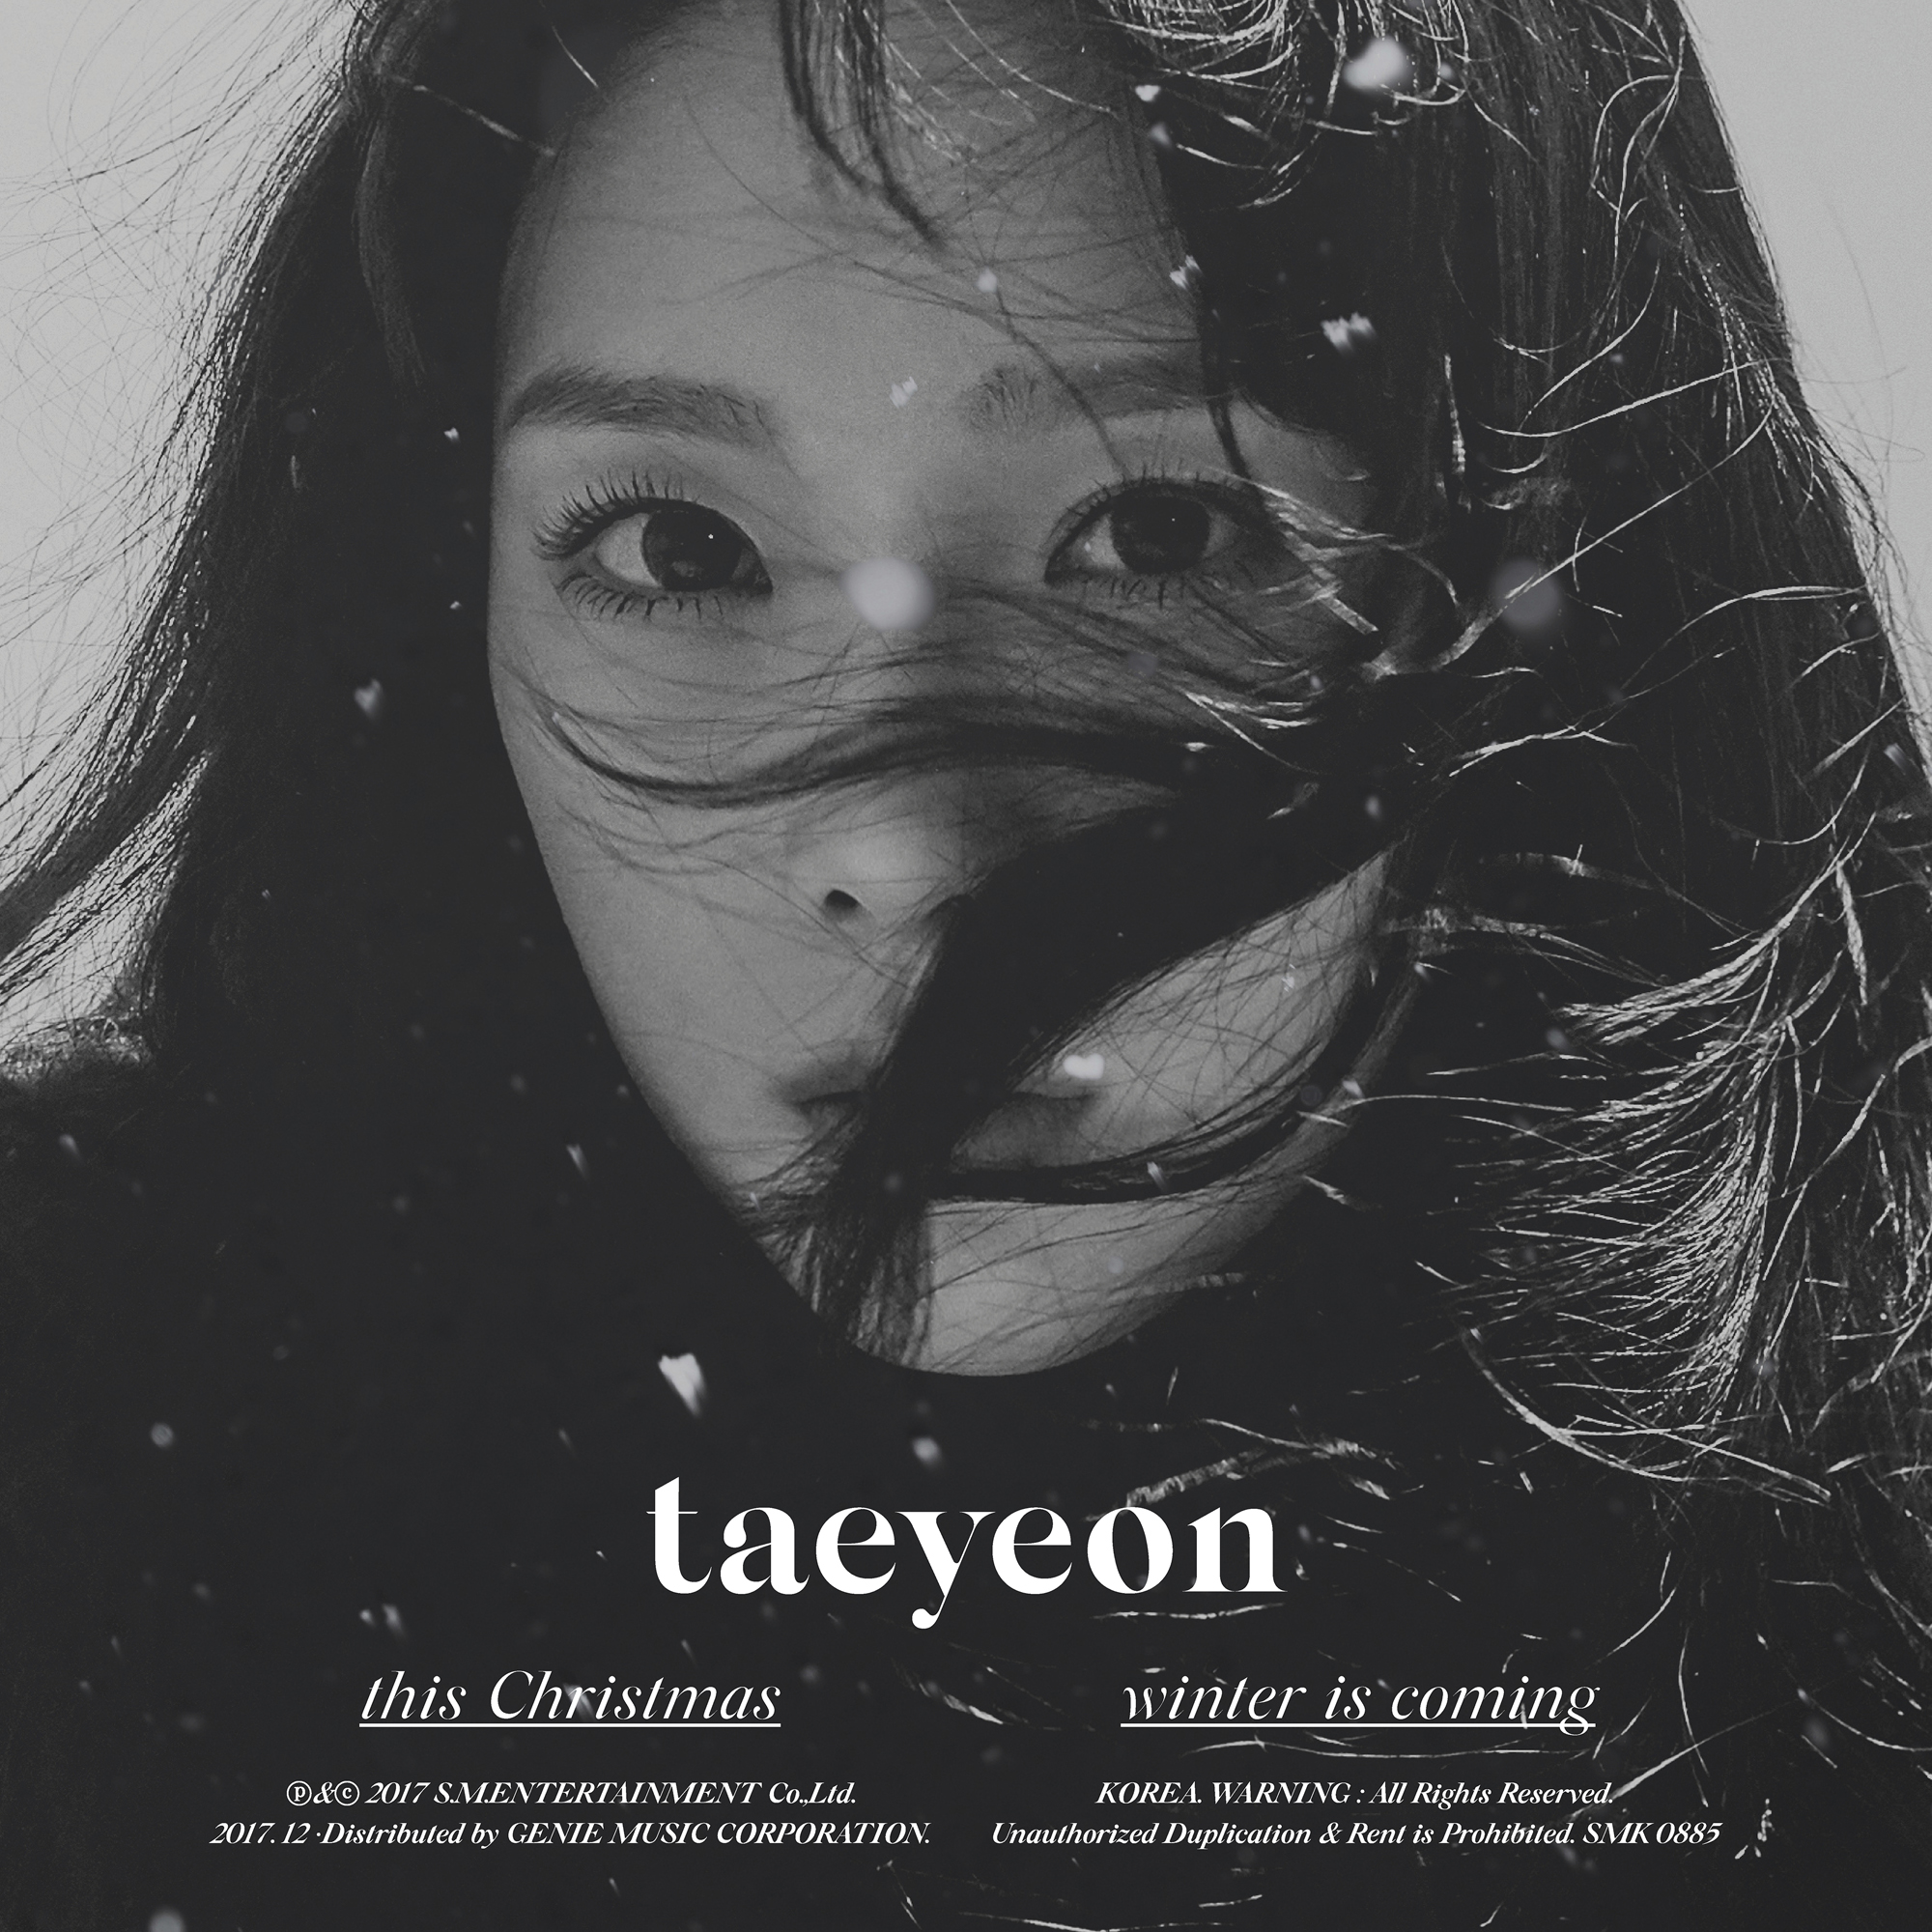 Winter and taeyeon